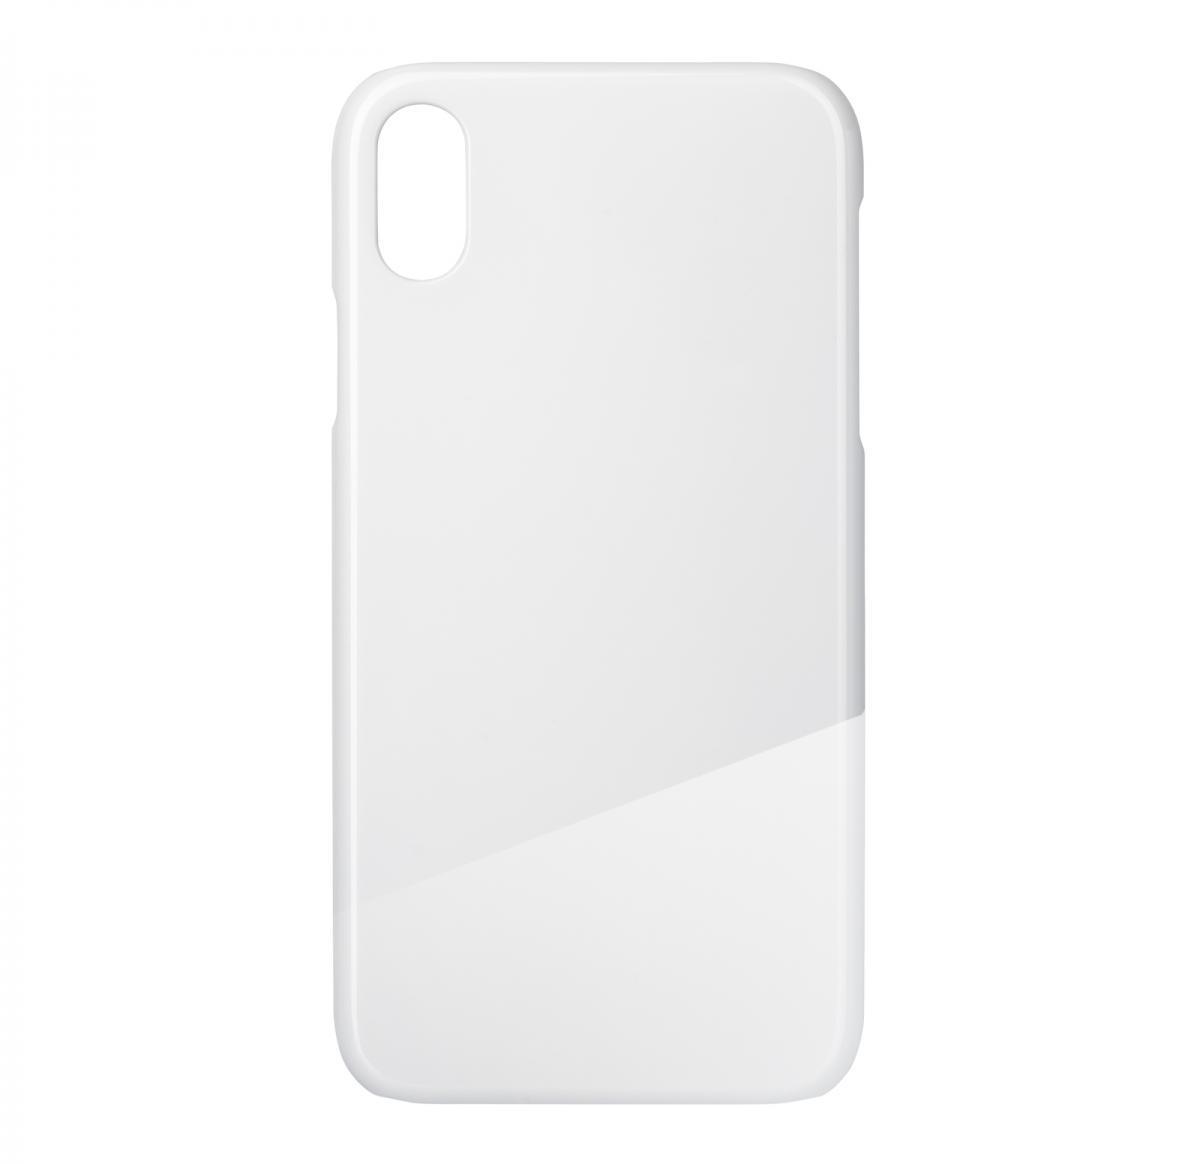 Smartphonecover -COVER iPhone XR WHITE